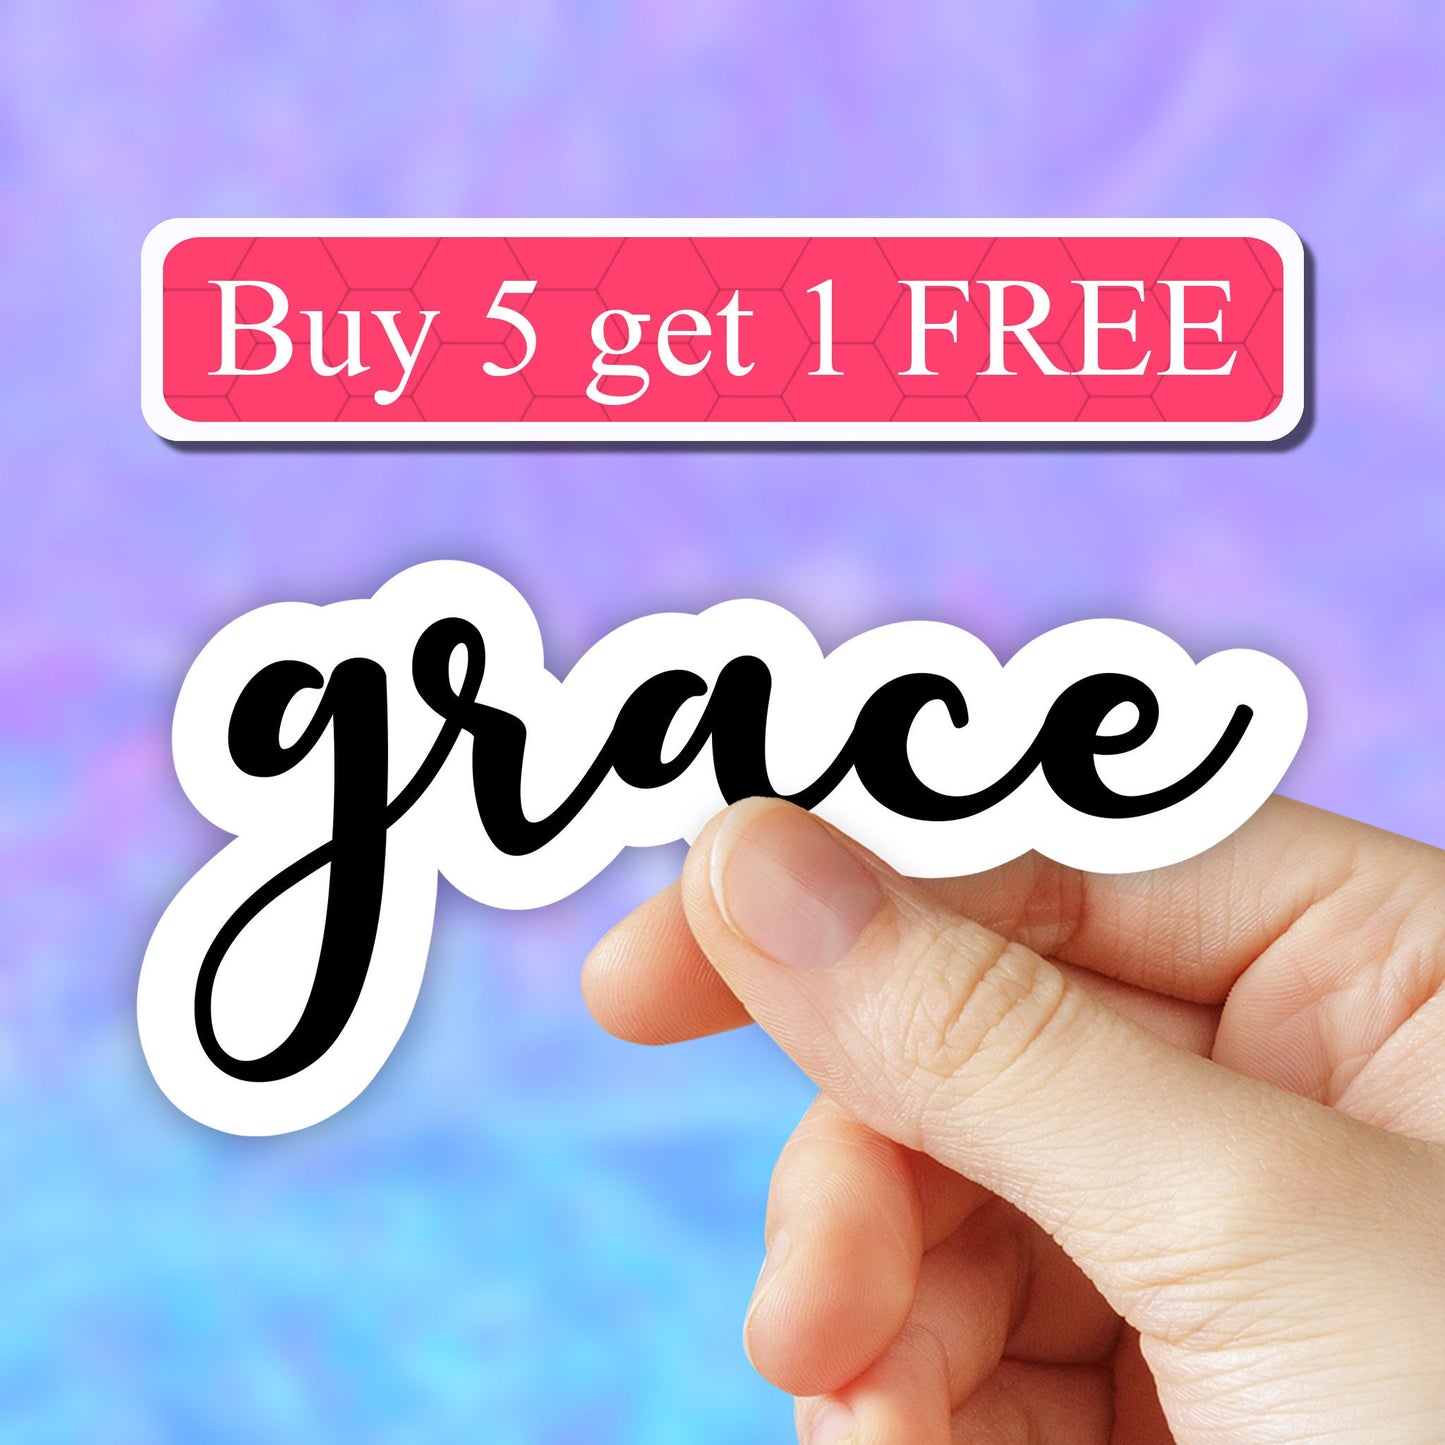 Grace Christian Stickers, Faith Stickers, Bible Verse Stickers, God Stickers, jesus sticker, Church decal, god stickers, water bottle decal